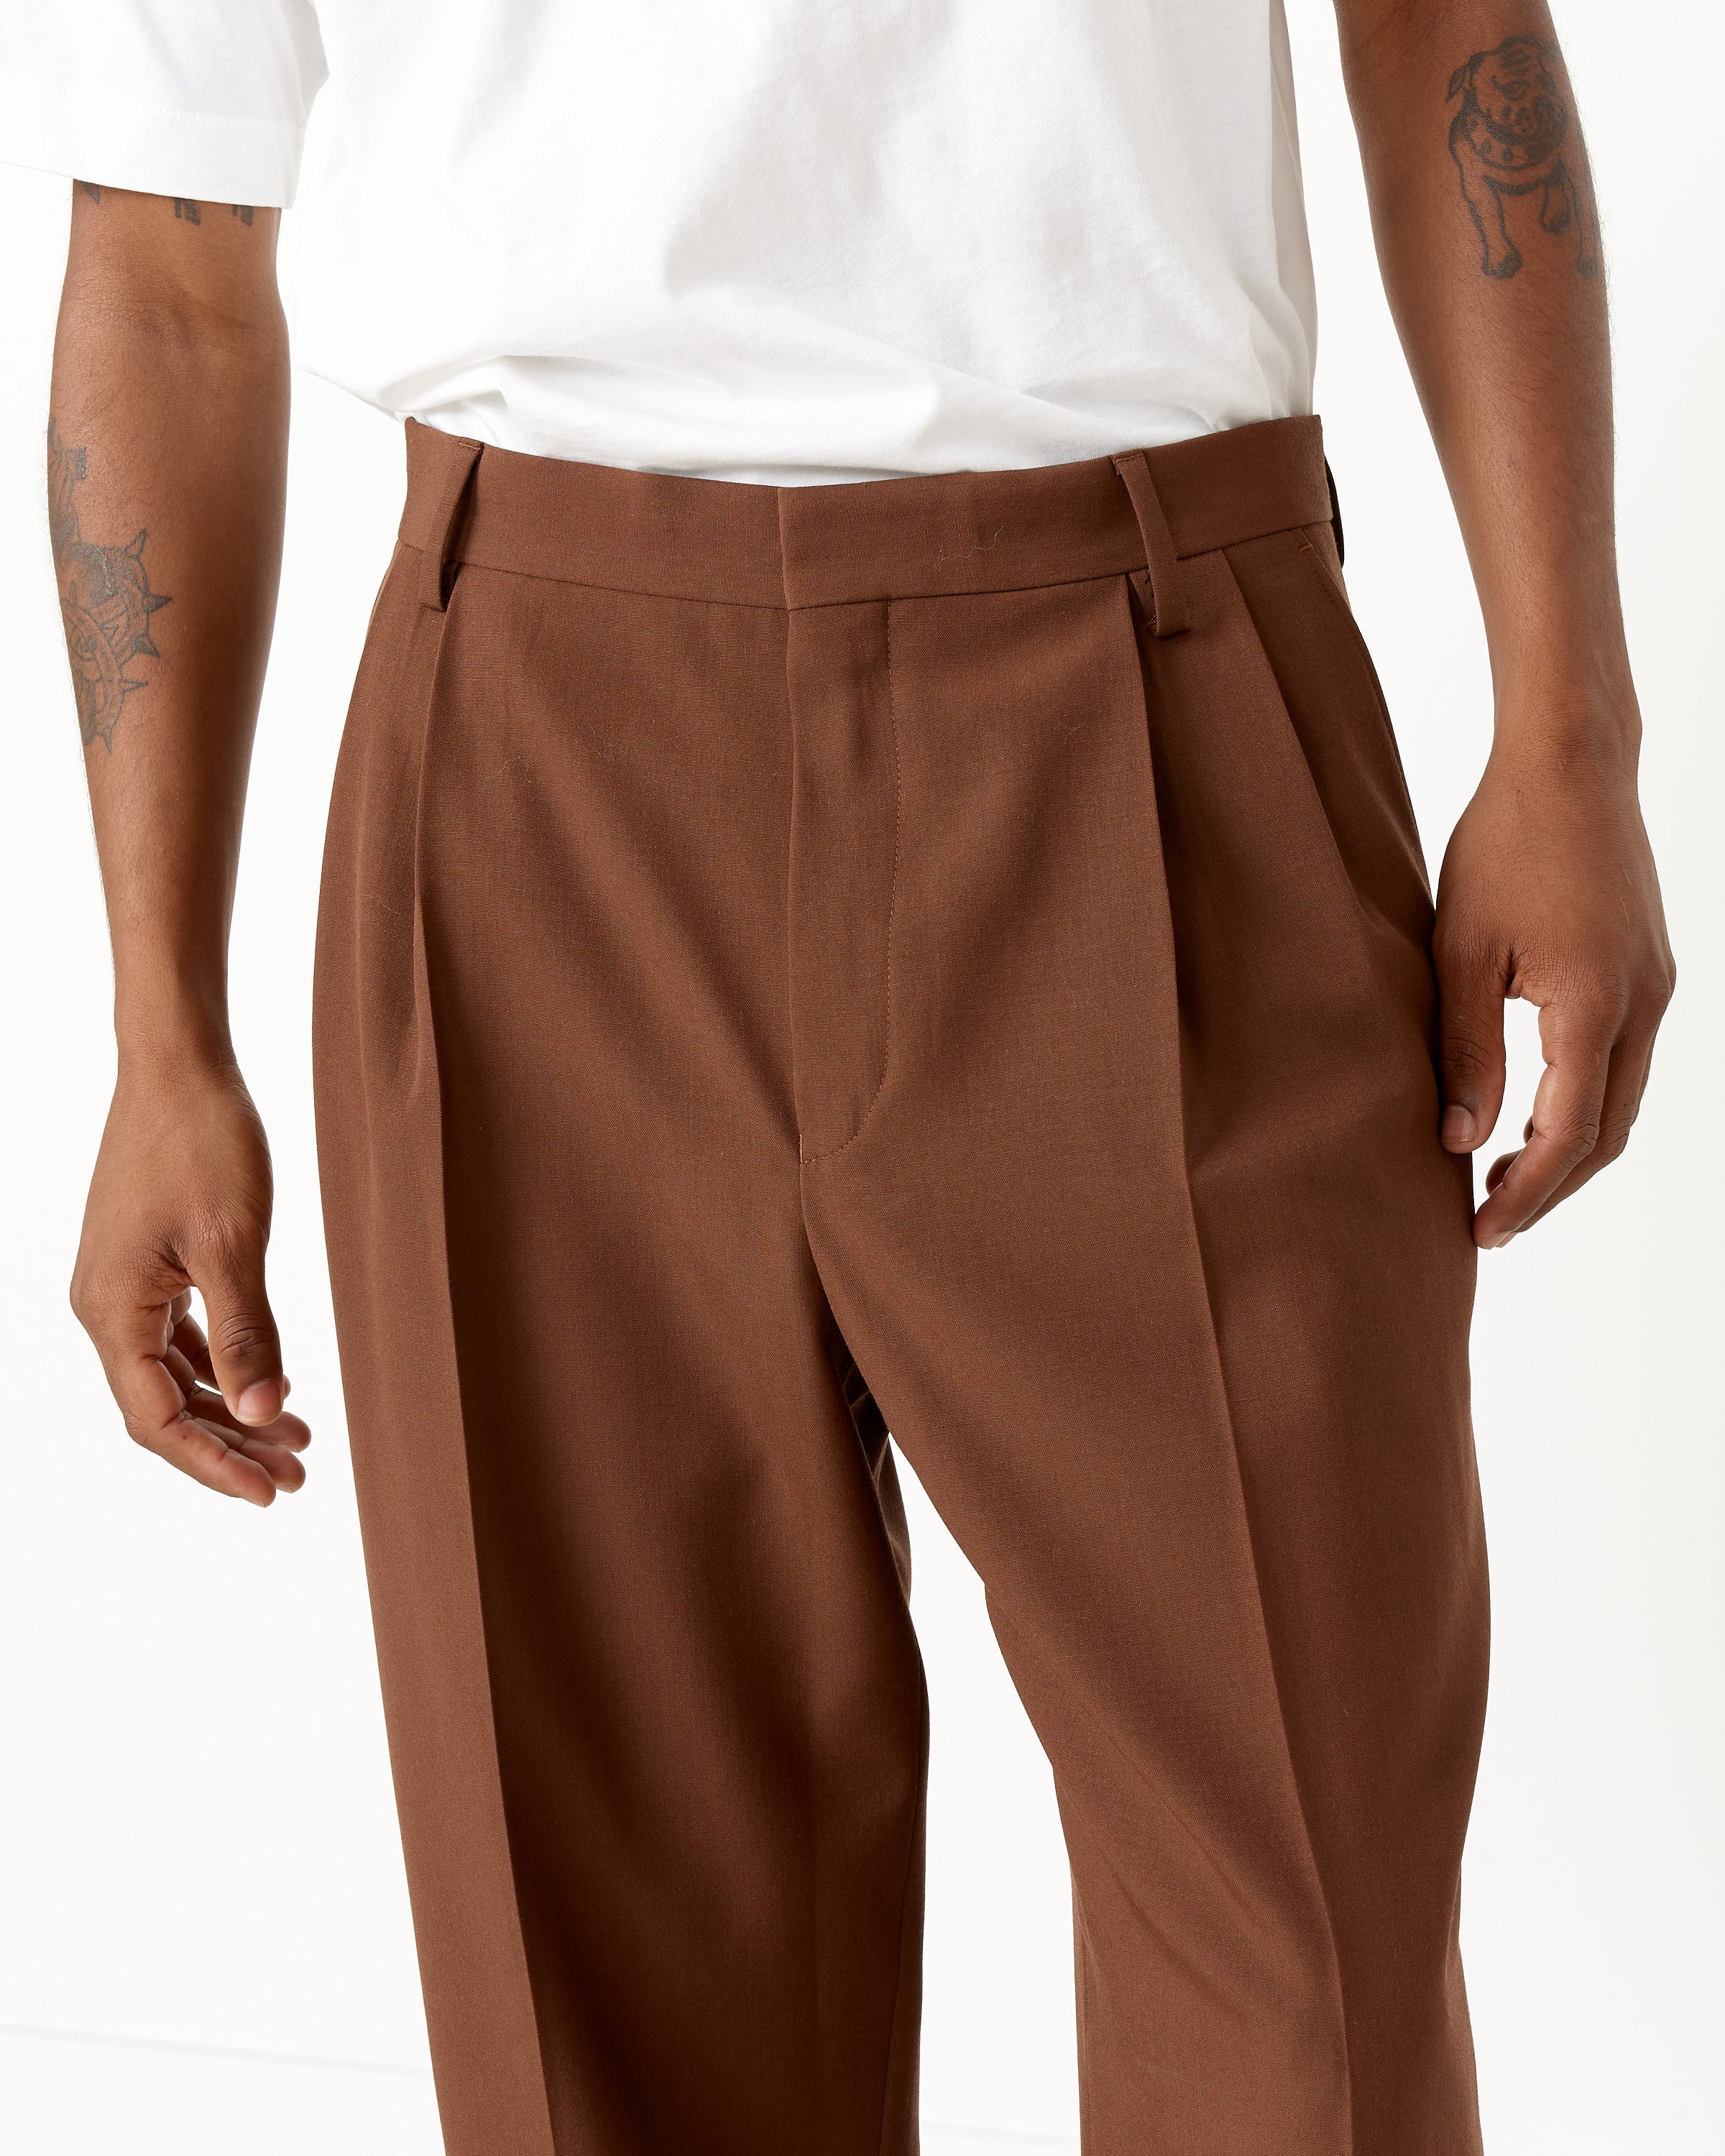 Pleated Pants: Function, Design & Style - Proper Cloth Help